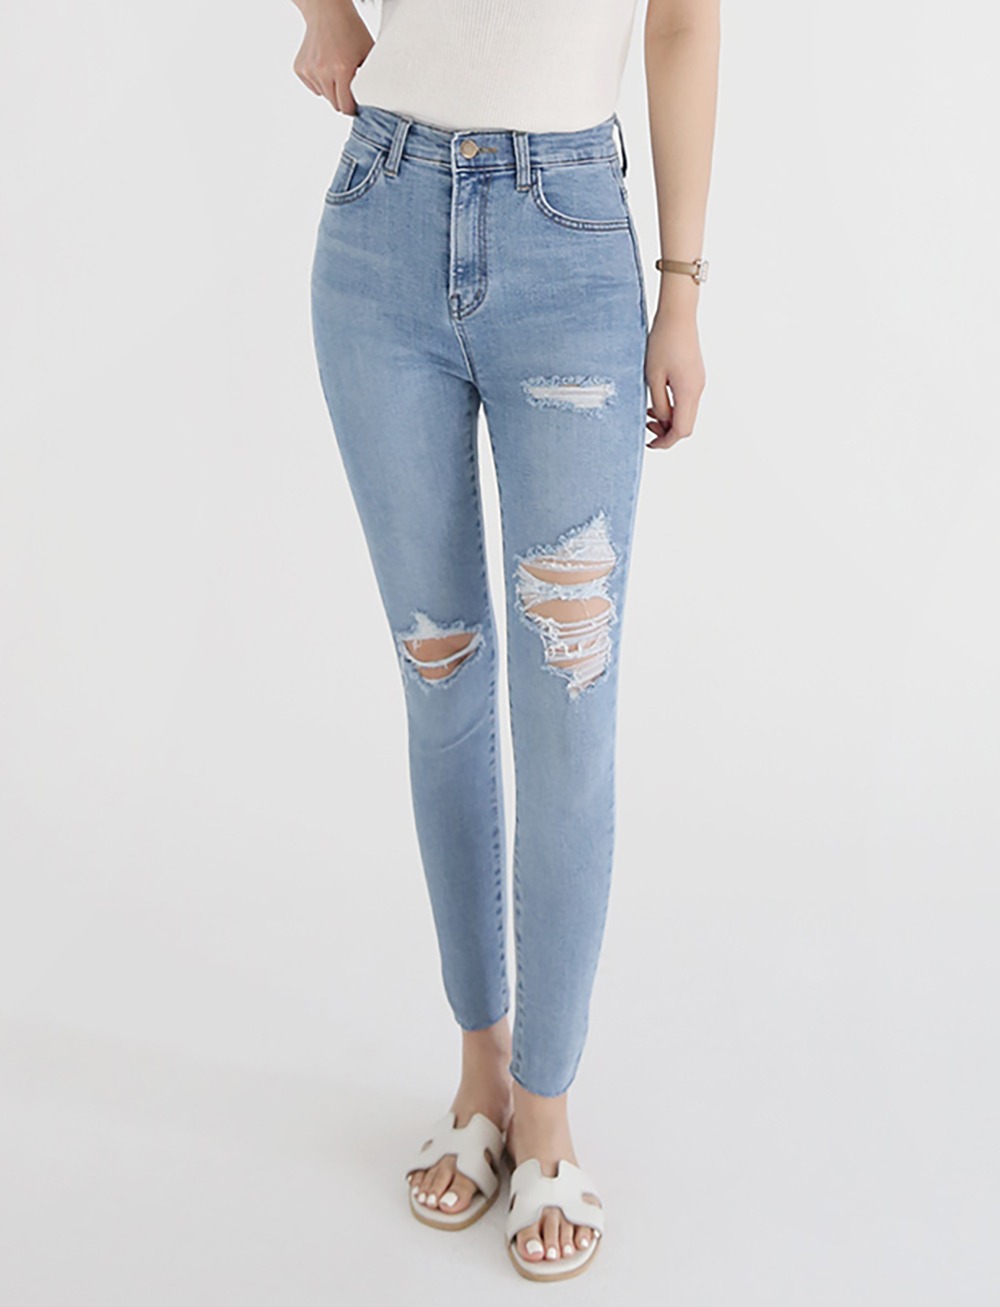 icy damage skinny jeans